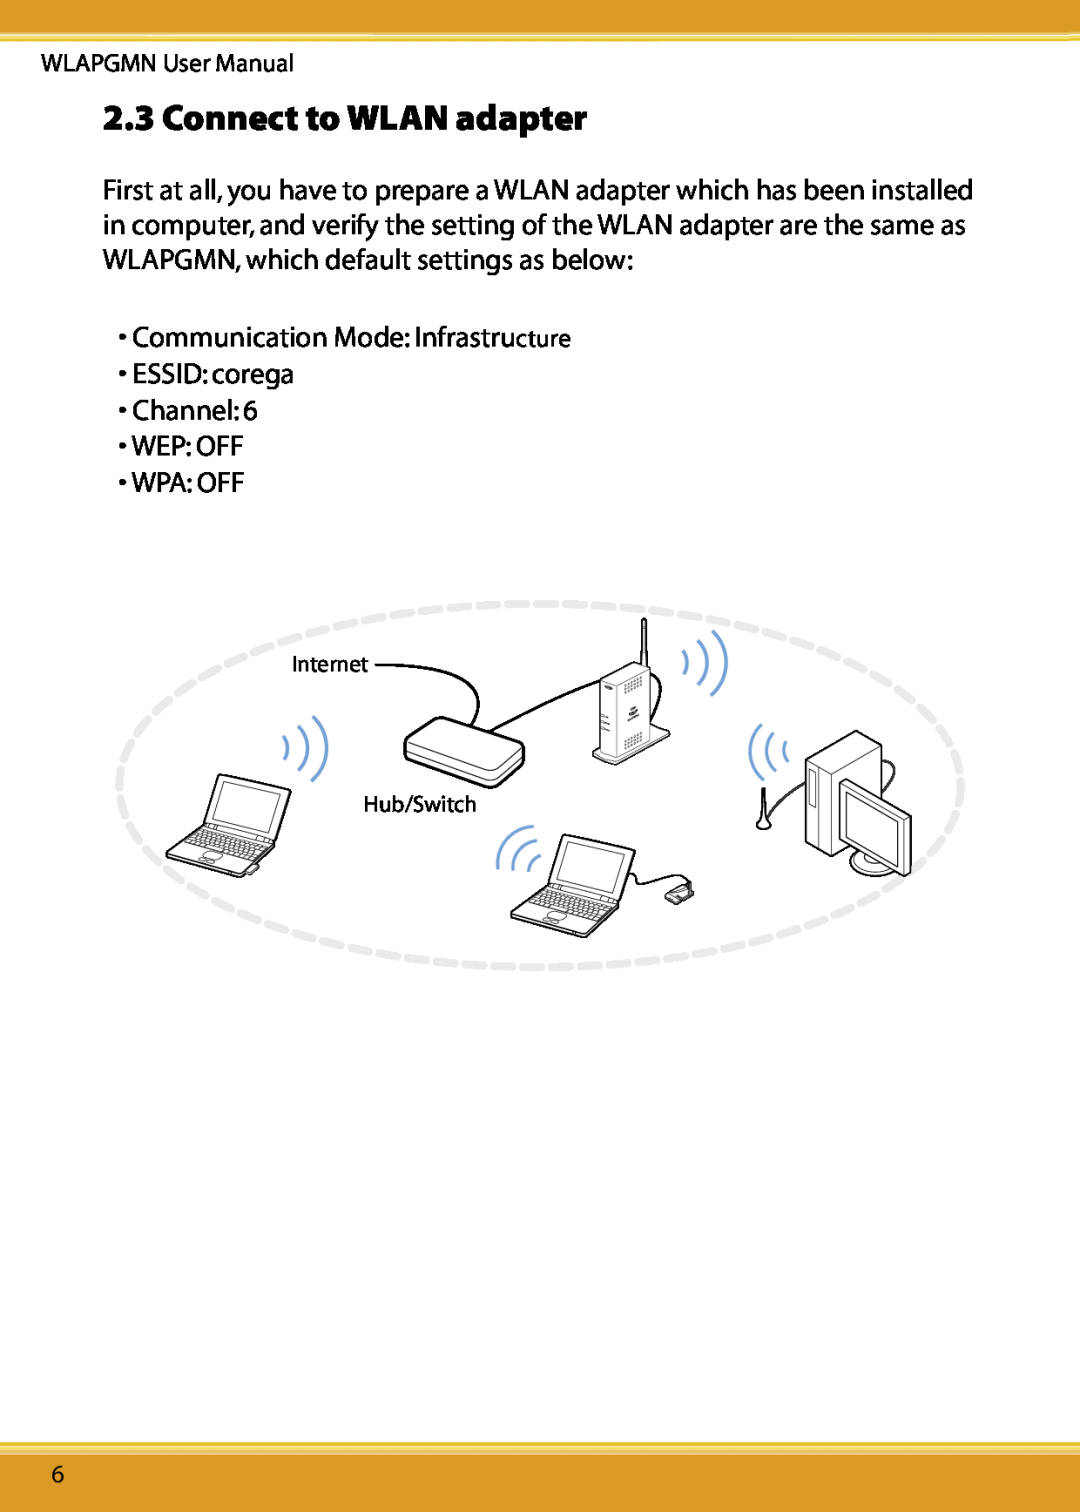 Corega CG-WLAPGMN Connect to WLAN adapter, Communication Mode Infrastructure ESSID corega Channel WEP OFF, Wpa Off 